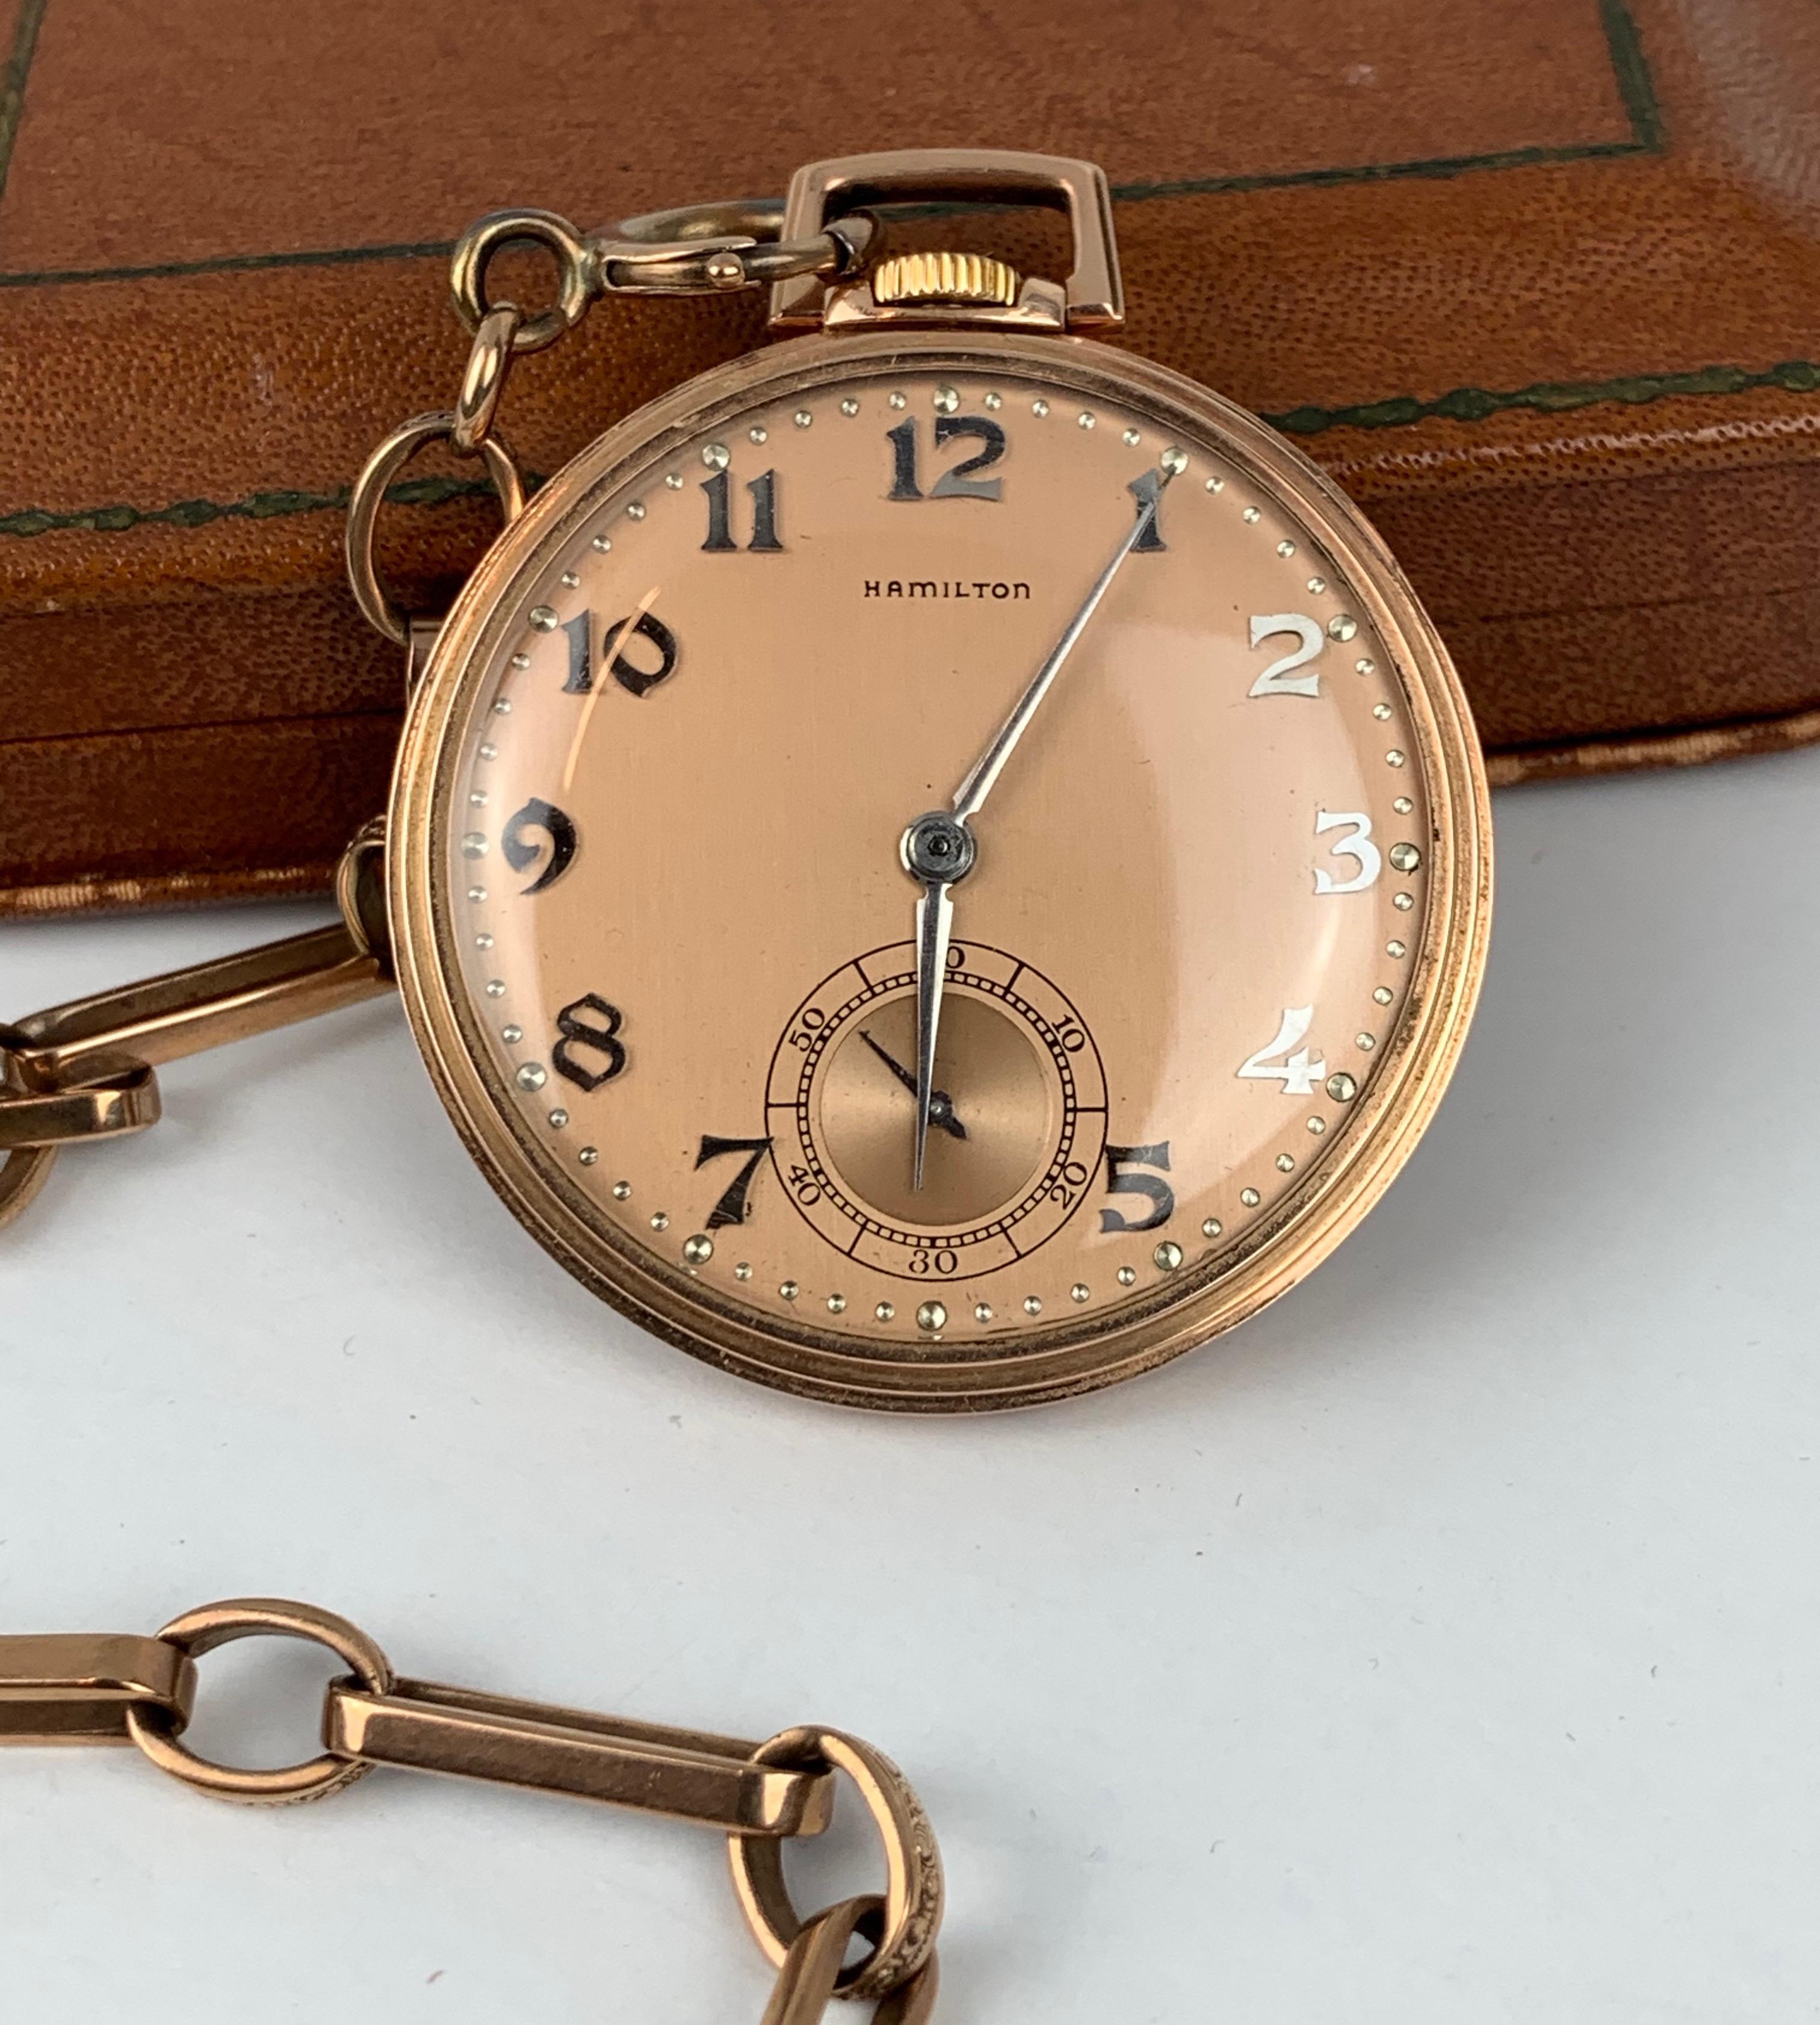 Hamilton Watch Compny's 14k rose gold open faced pocket watch and chain with original presentation case..  When you research the movement serial number of #1205496 October 21, 1916 comes up as its date of manufacture.  The open face 1/4